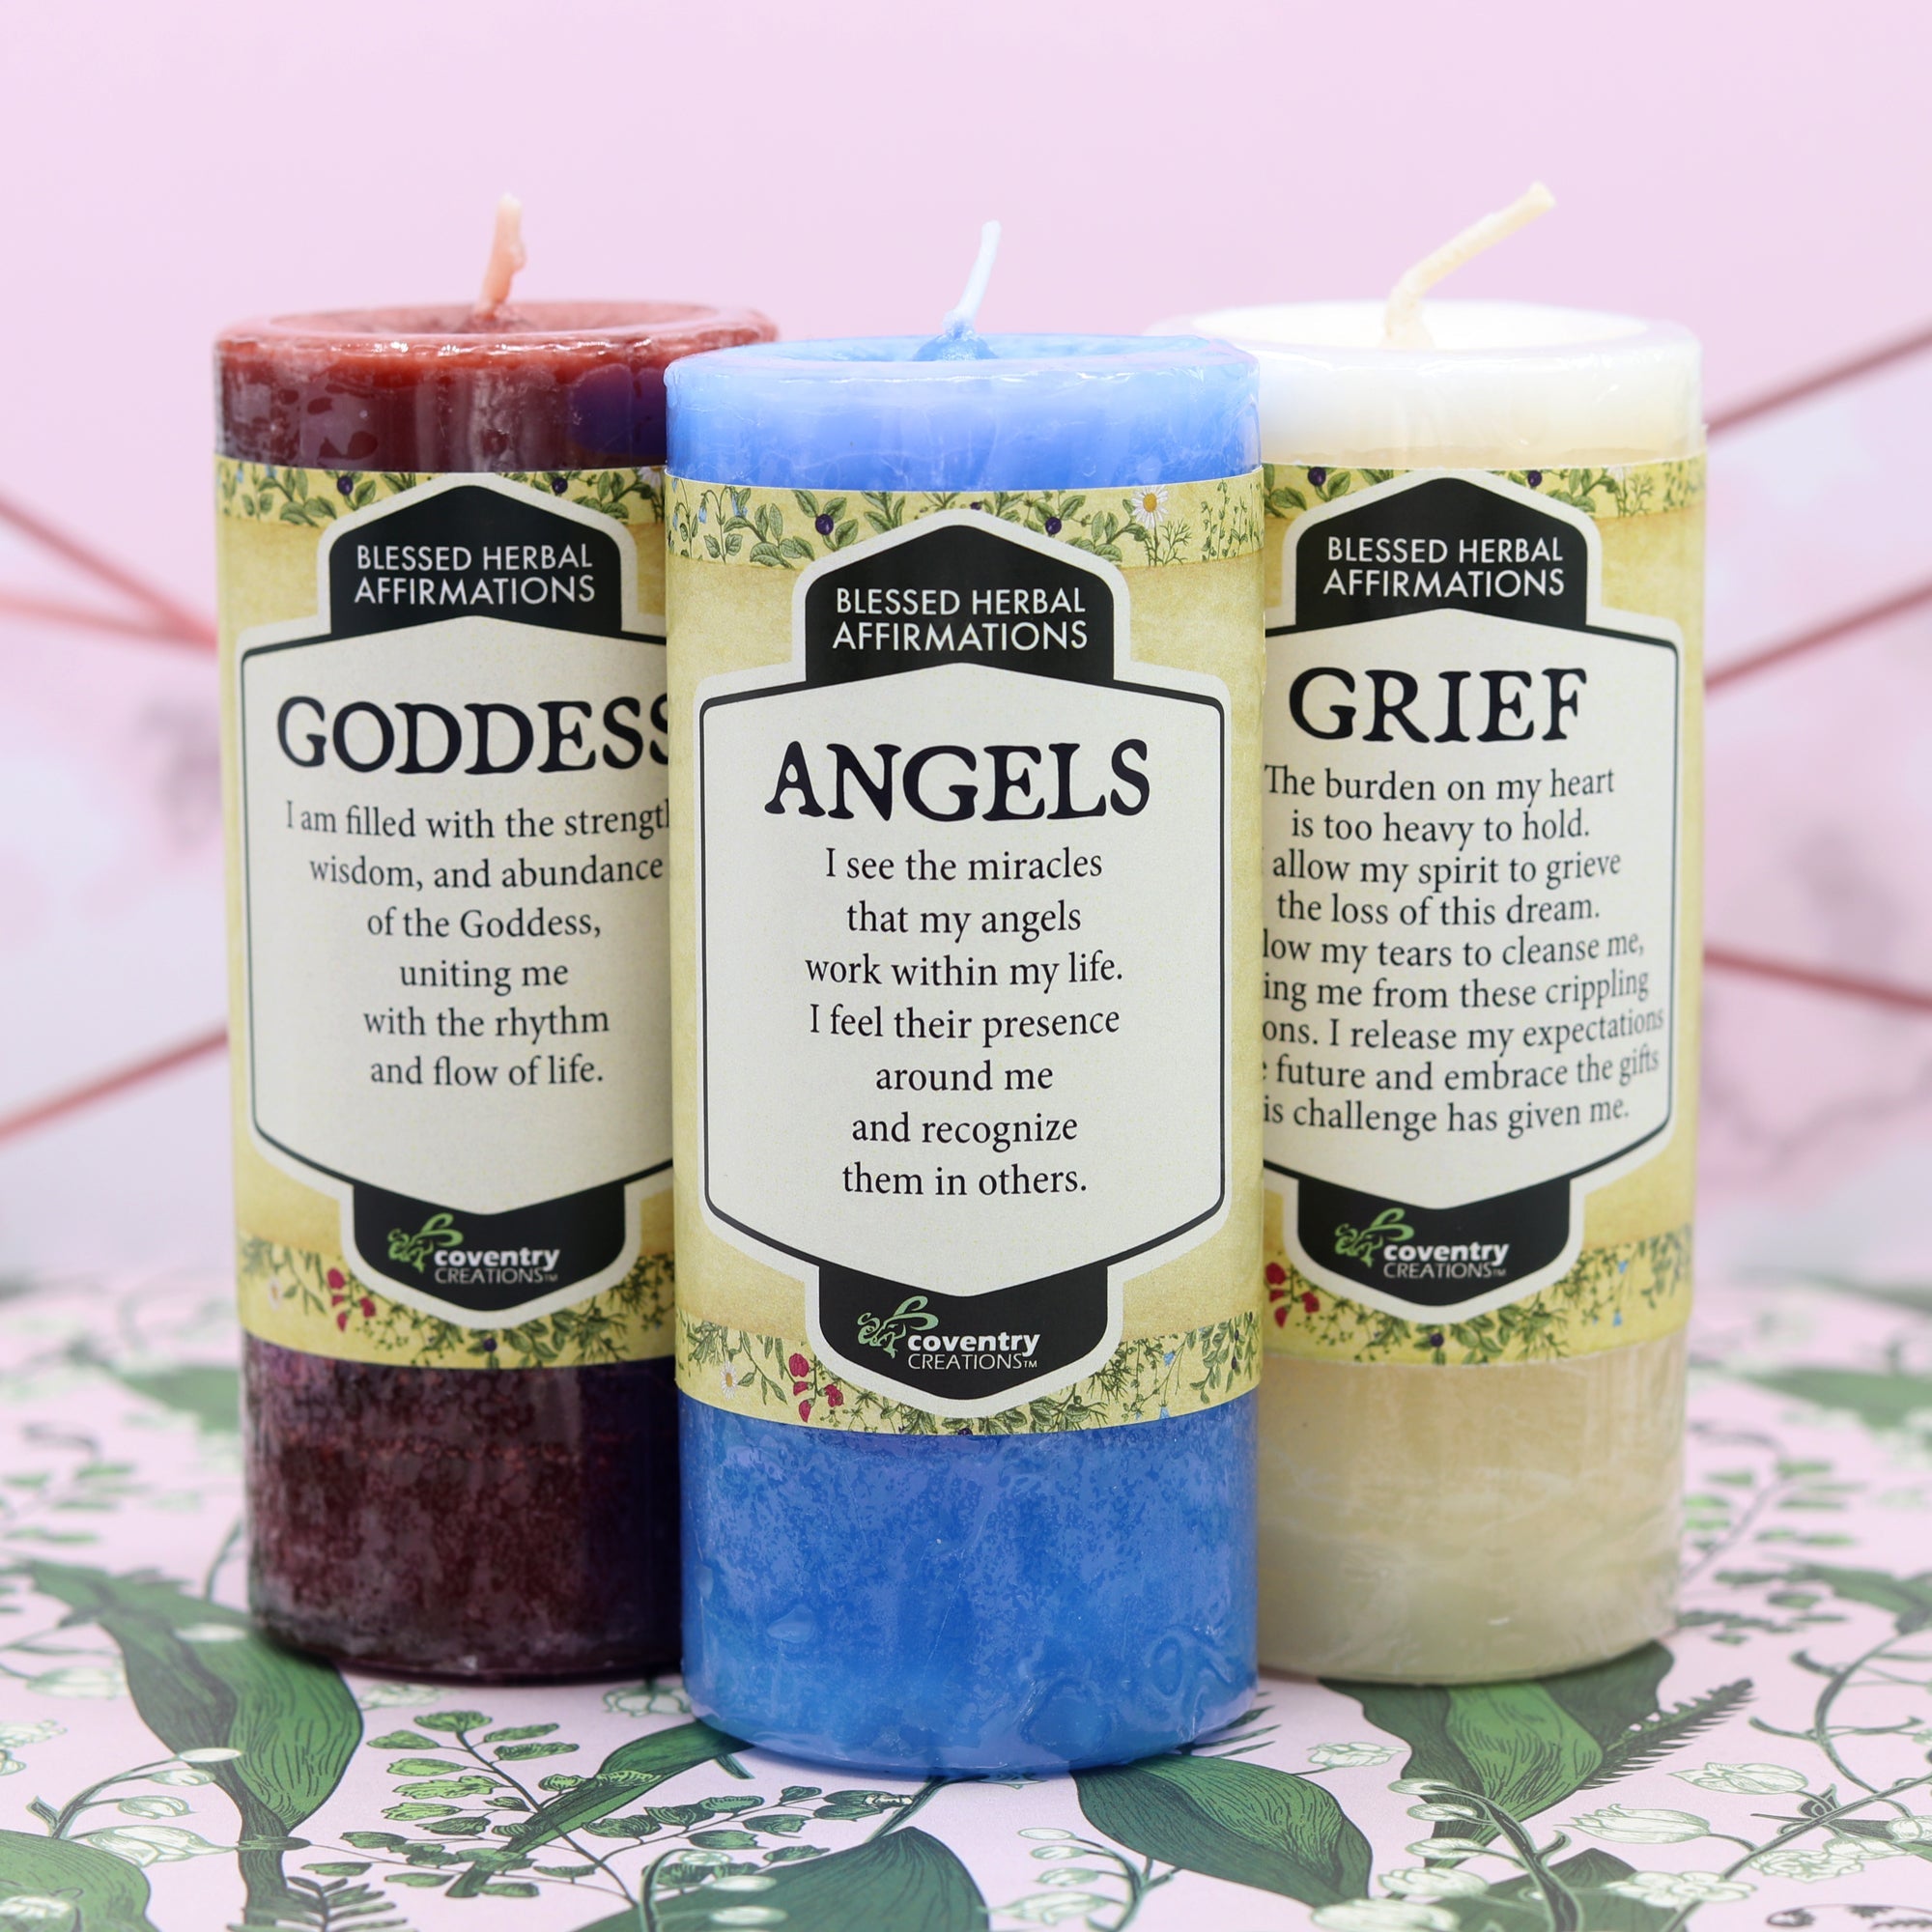 Angel Affirmation Candle - 13 Moons